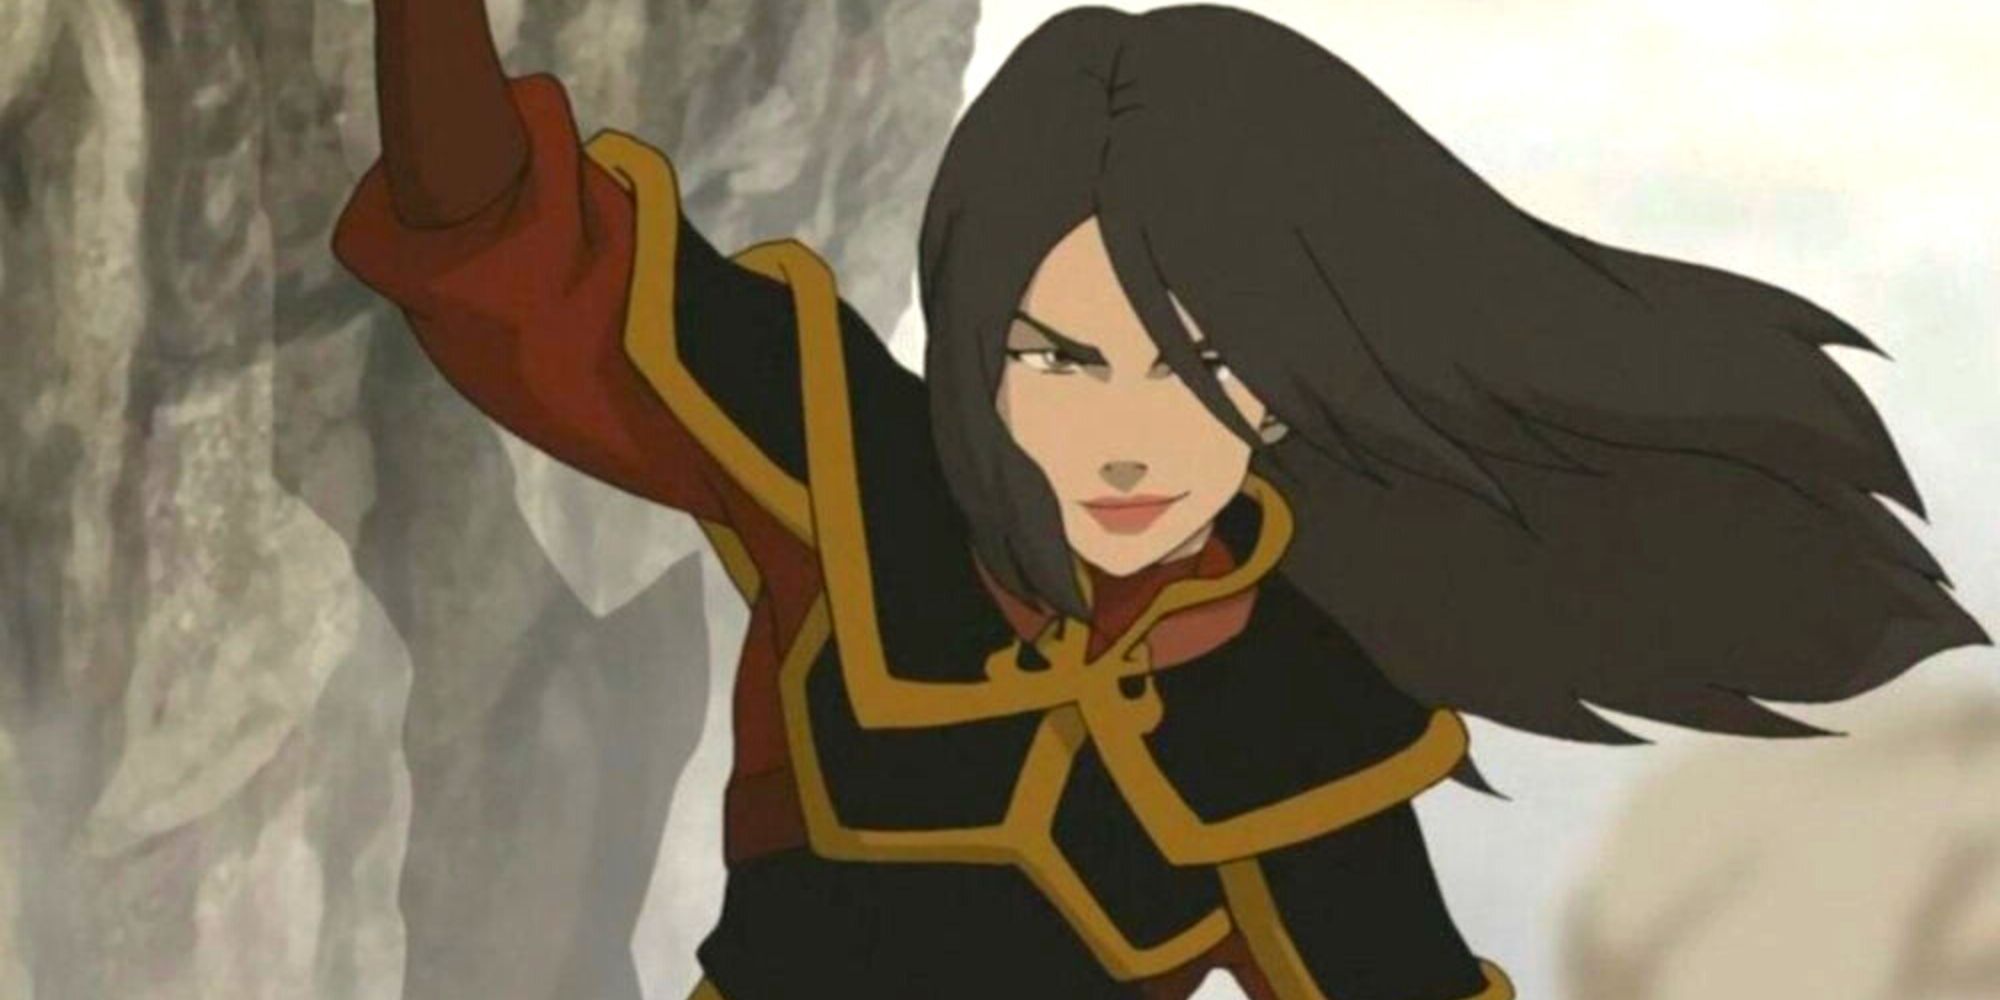 ‘Avatar The Last Airbender’ Ending Explained Was Fire Lord Ozai Defeated?